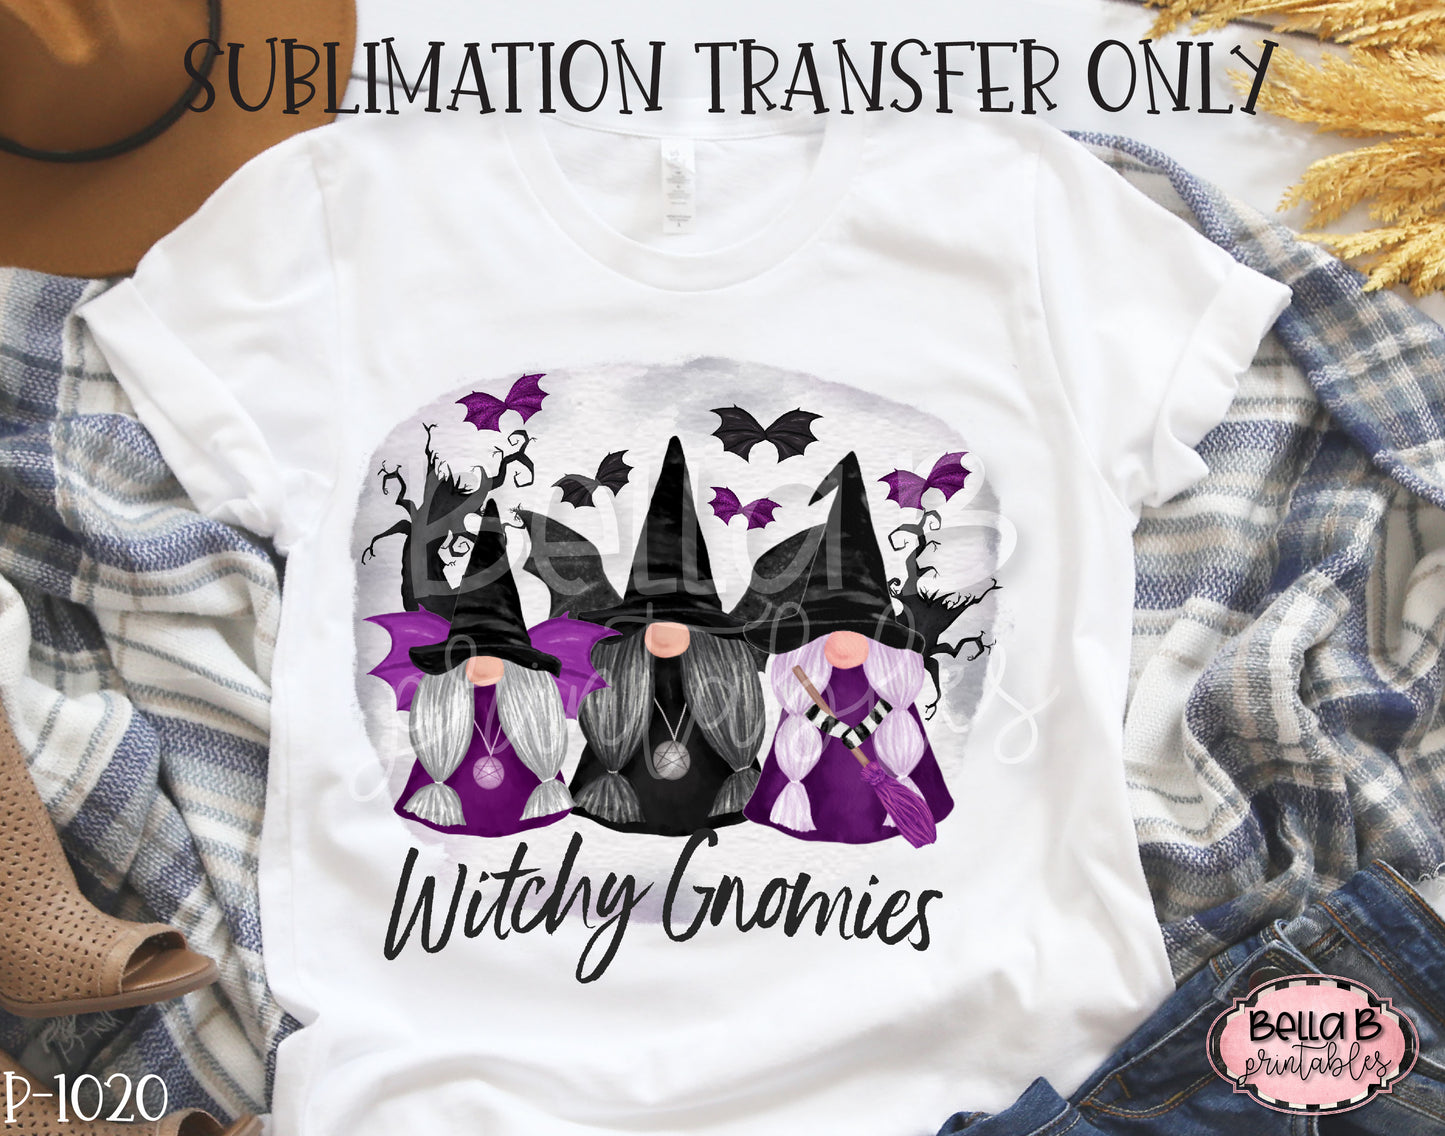 Halloween Gnomes - Witchy Gnomies Sublimation Transfer, Ready To Press